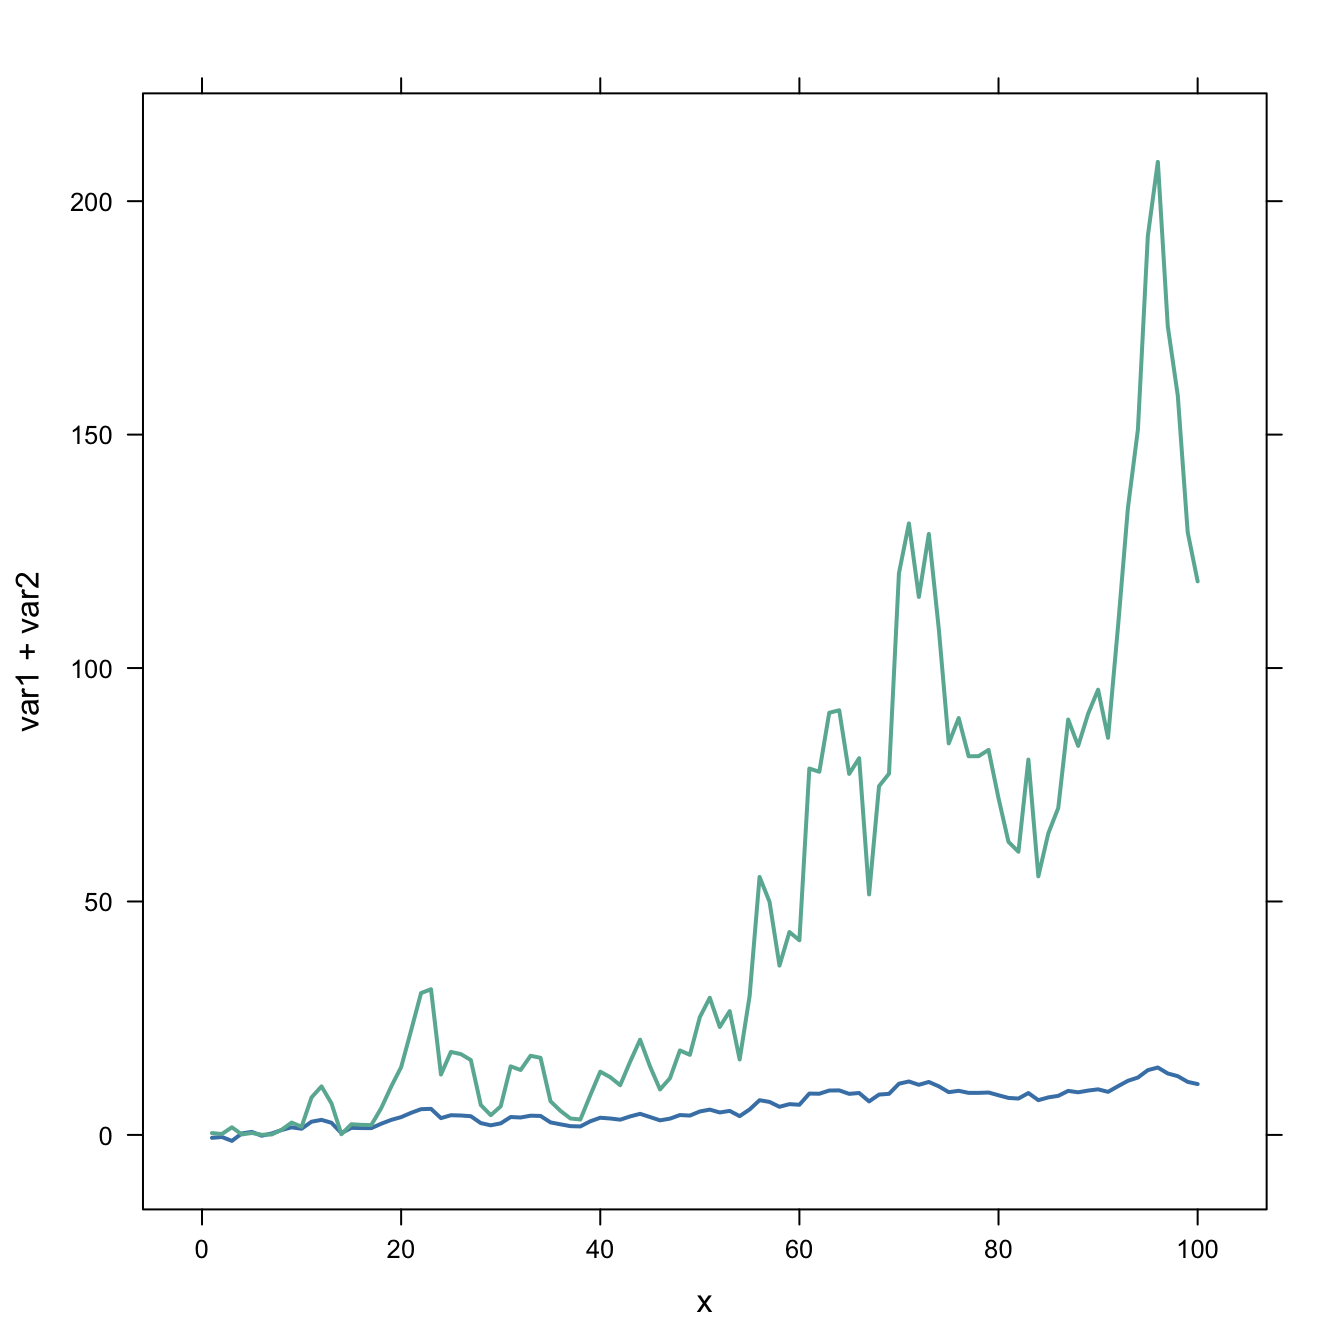 Dual Y Axis In R The R Graph Gallery